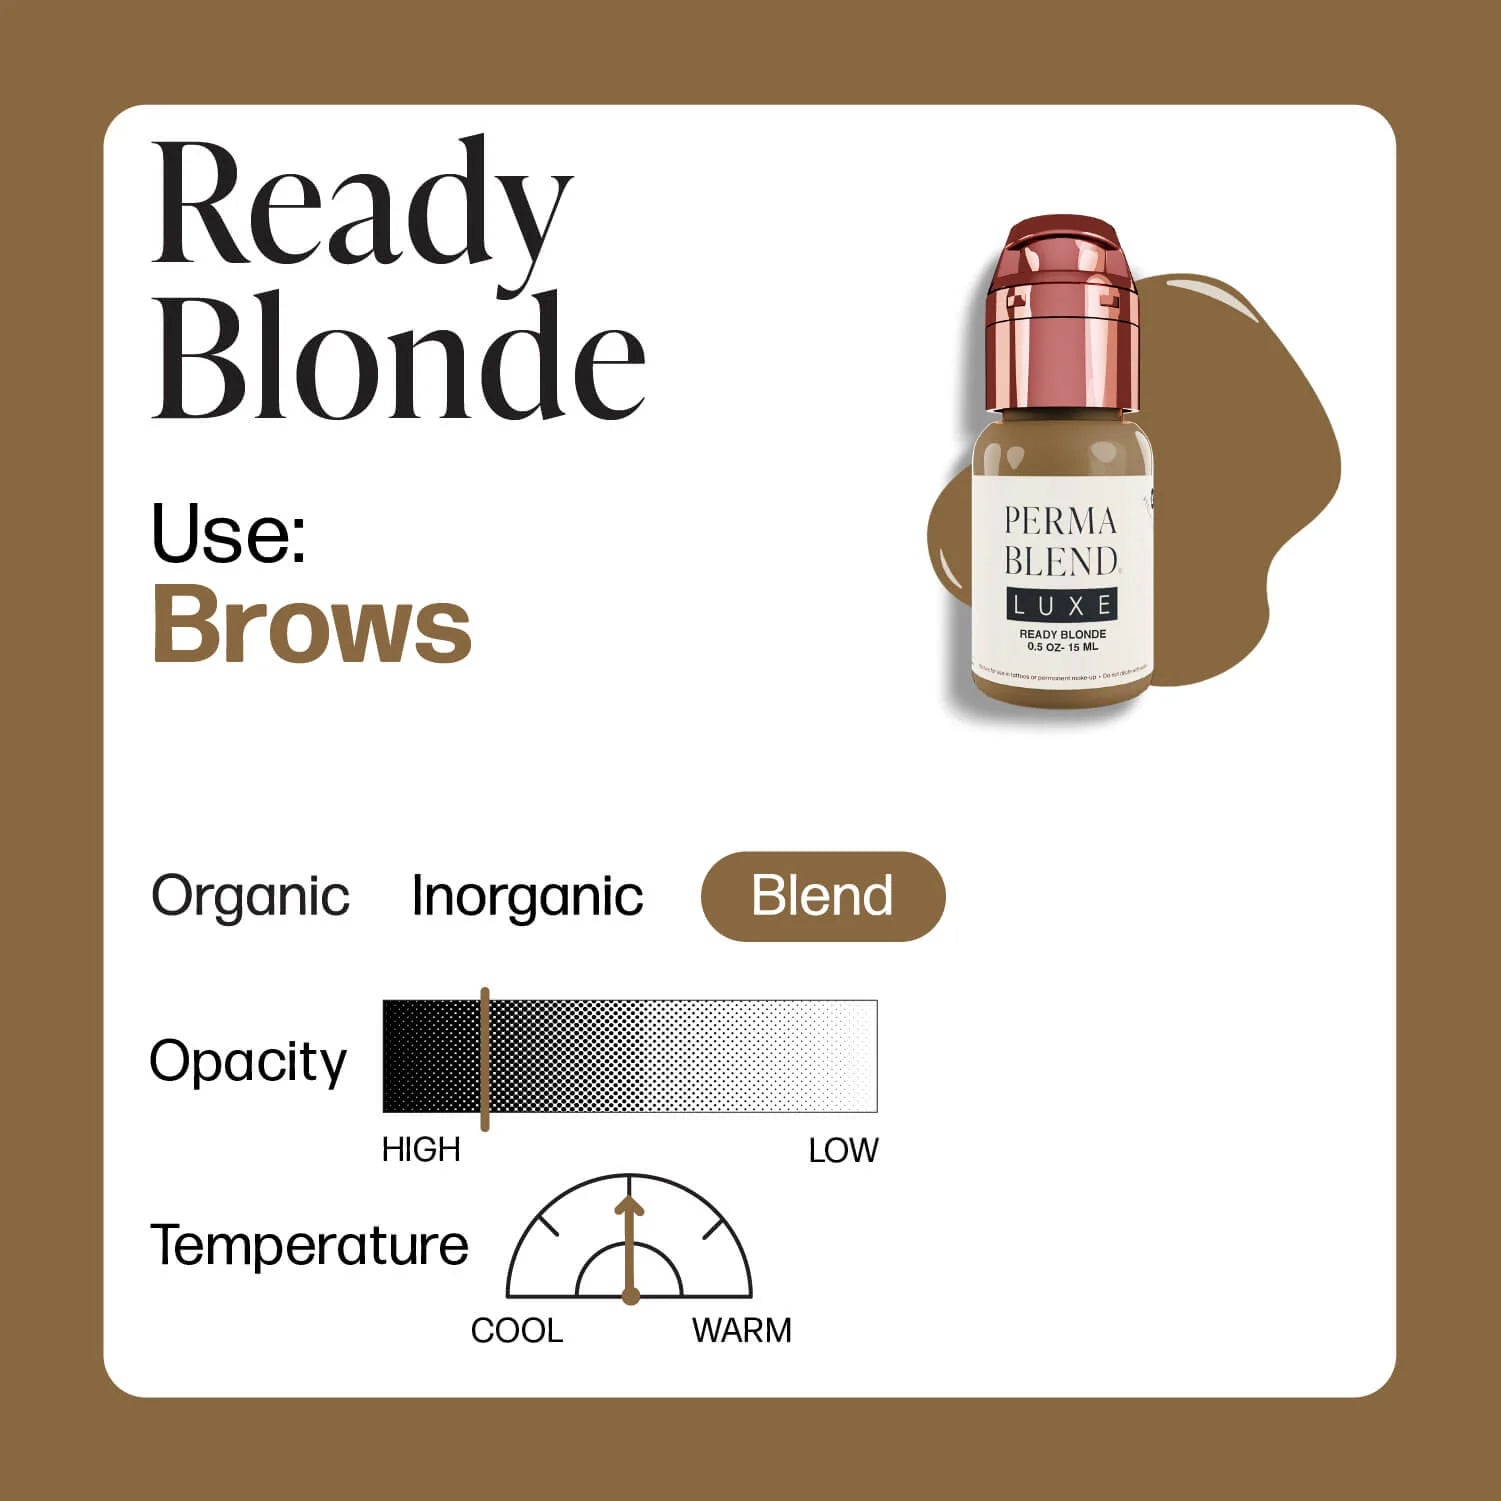 Perma Blend Luxe - Ready Blonde